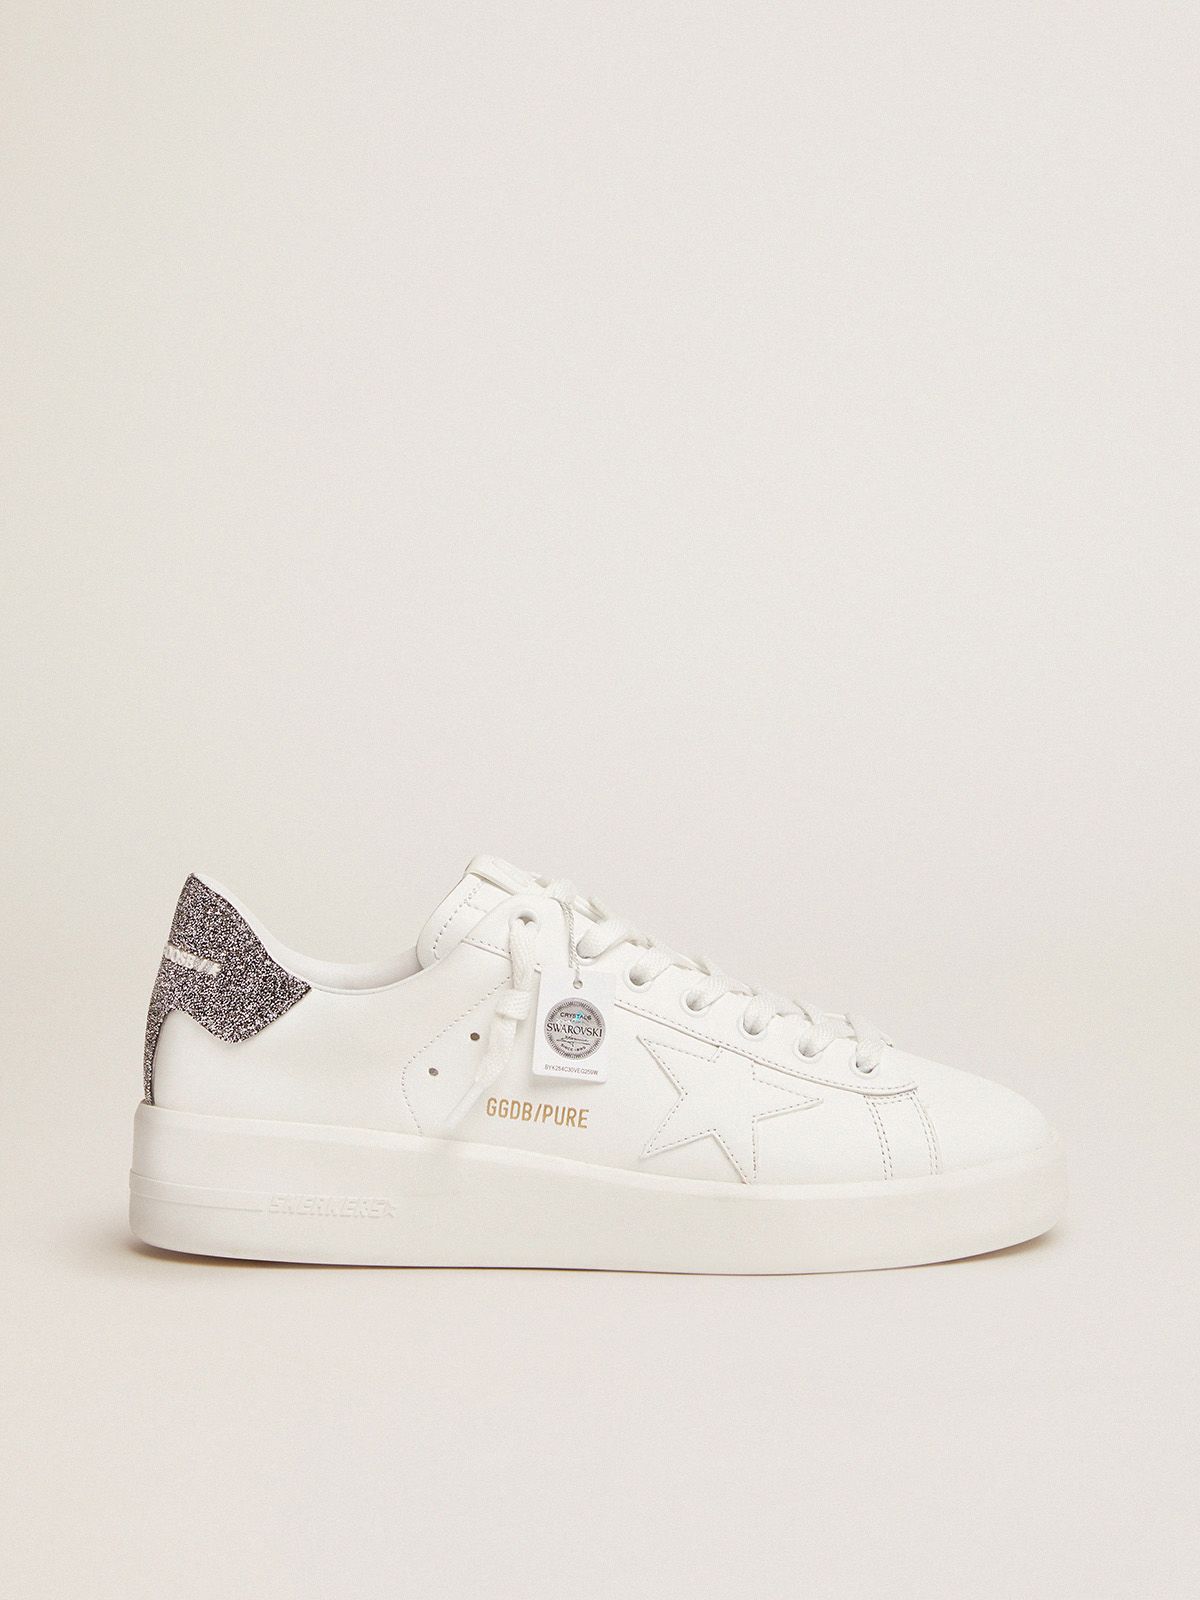 golden goose in leather heel sneakers crystal silver Purestar tab white with